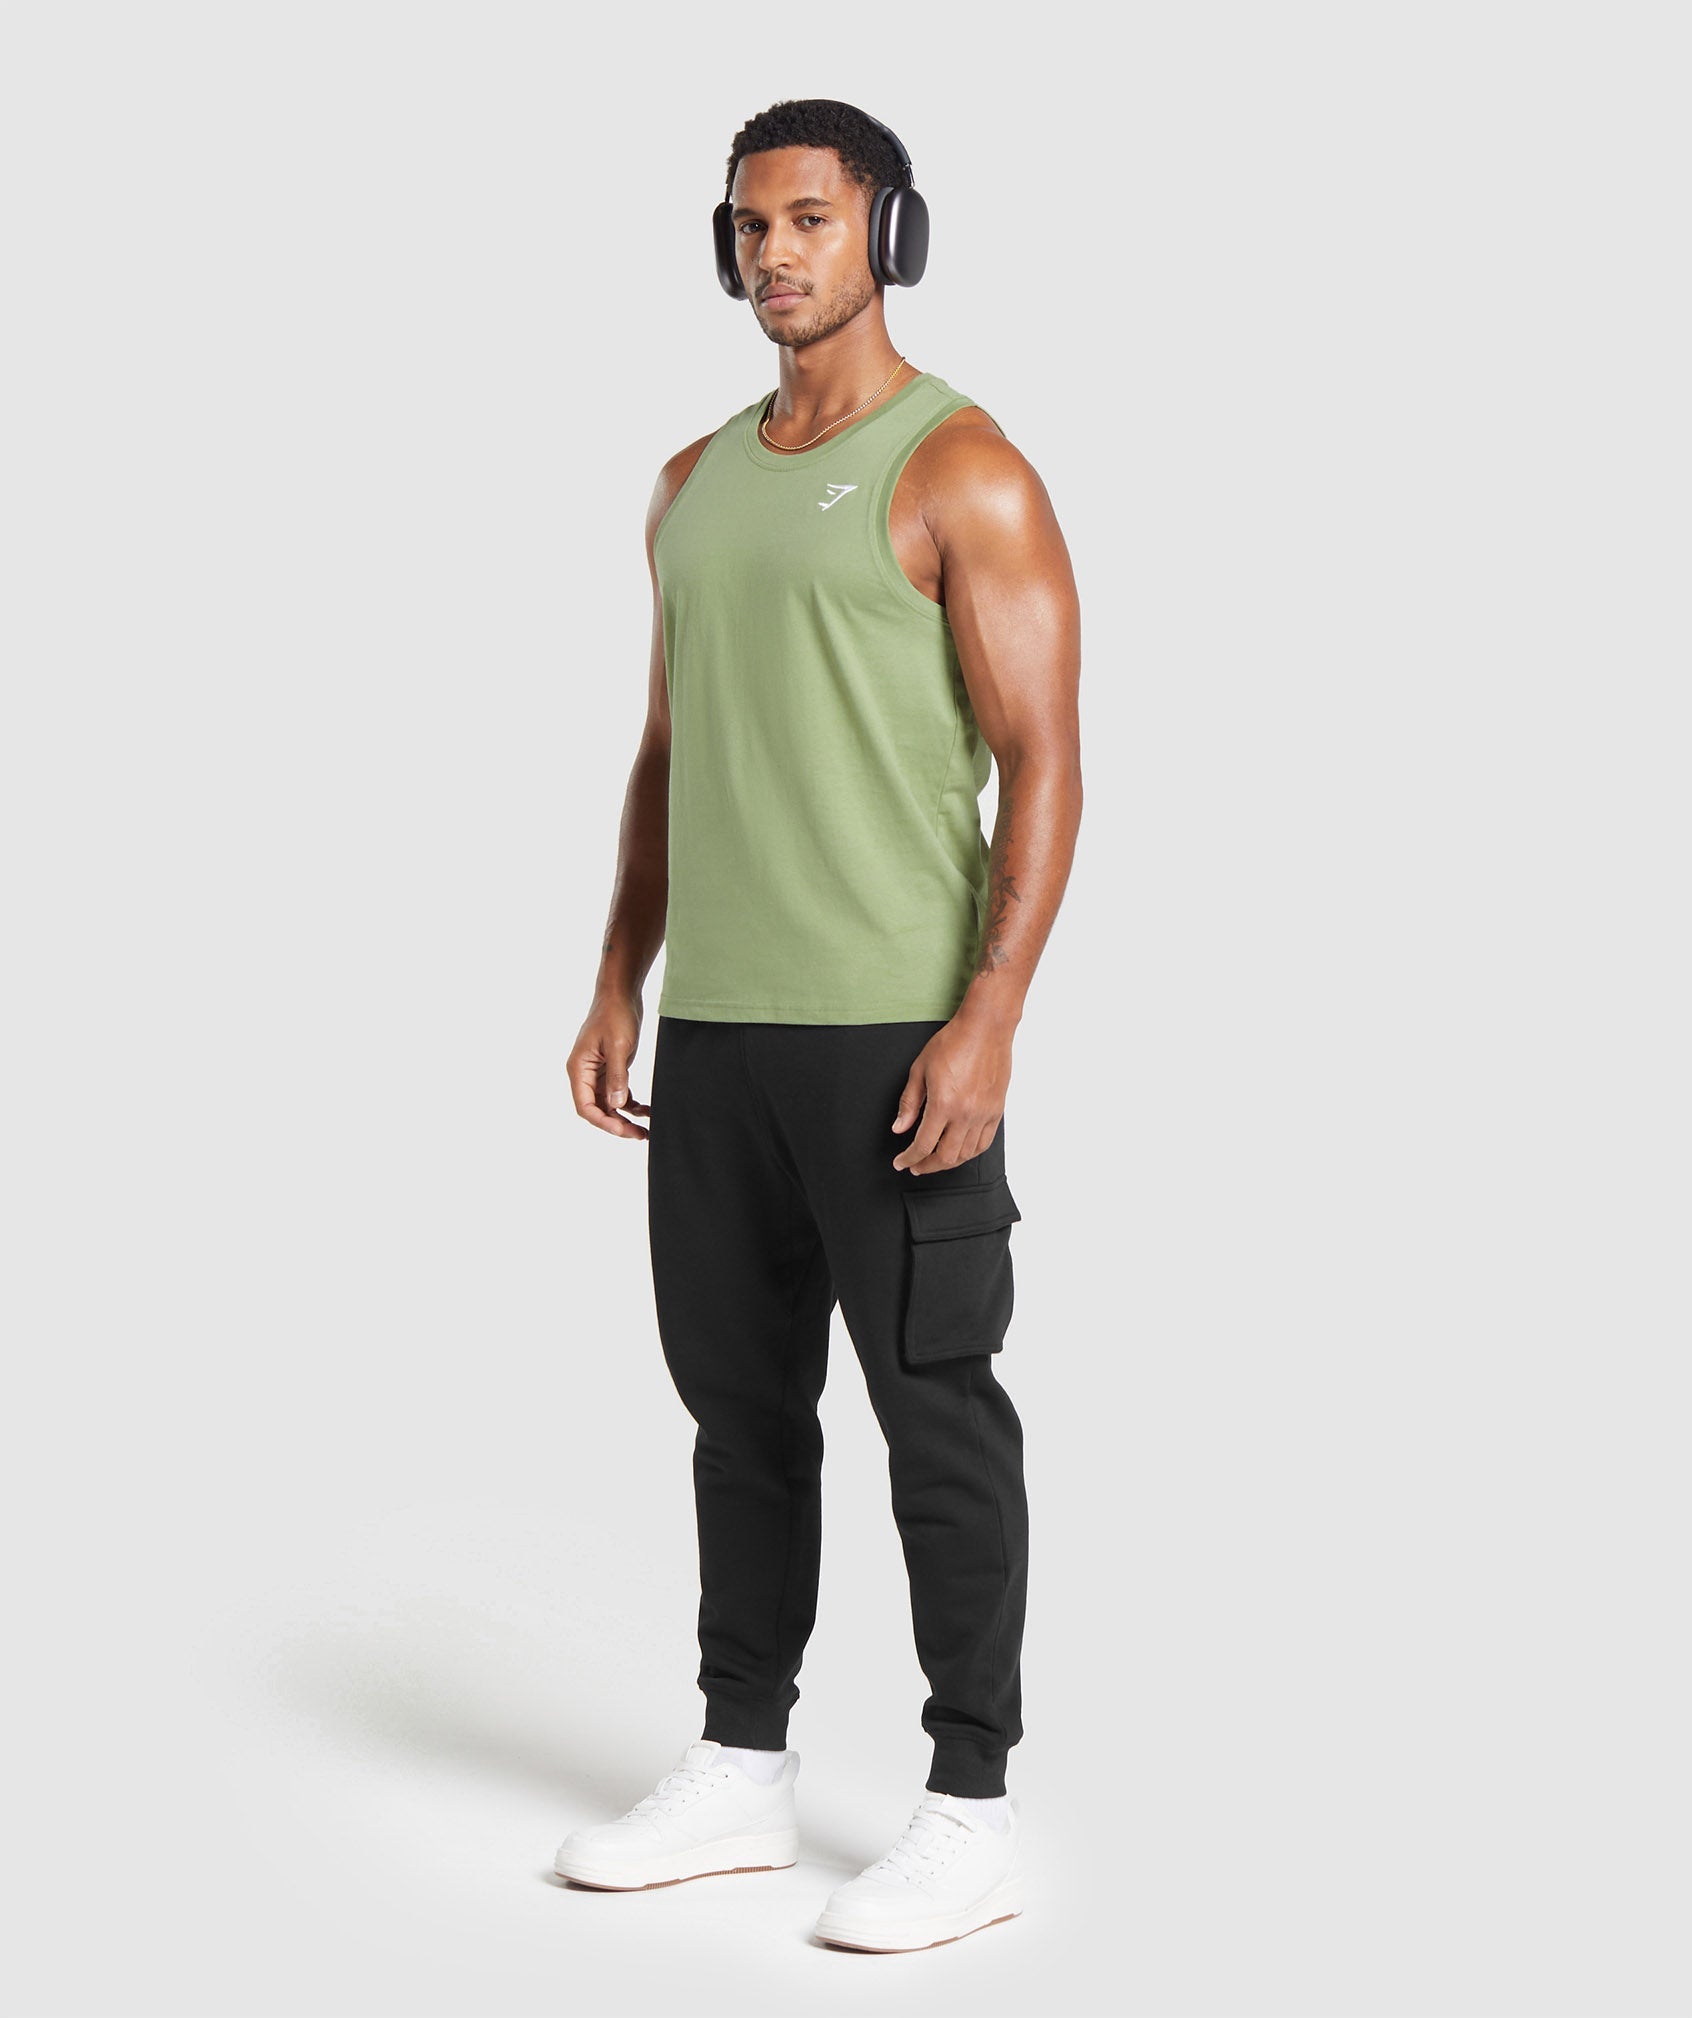 Crest Tank in Natural Sage Green - view 4